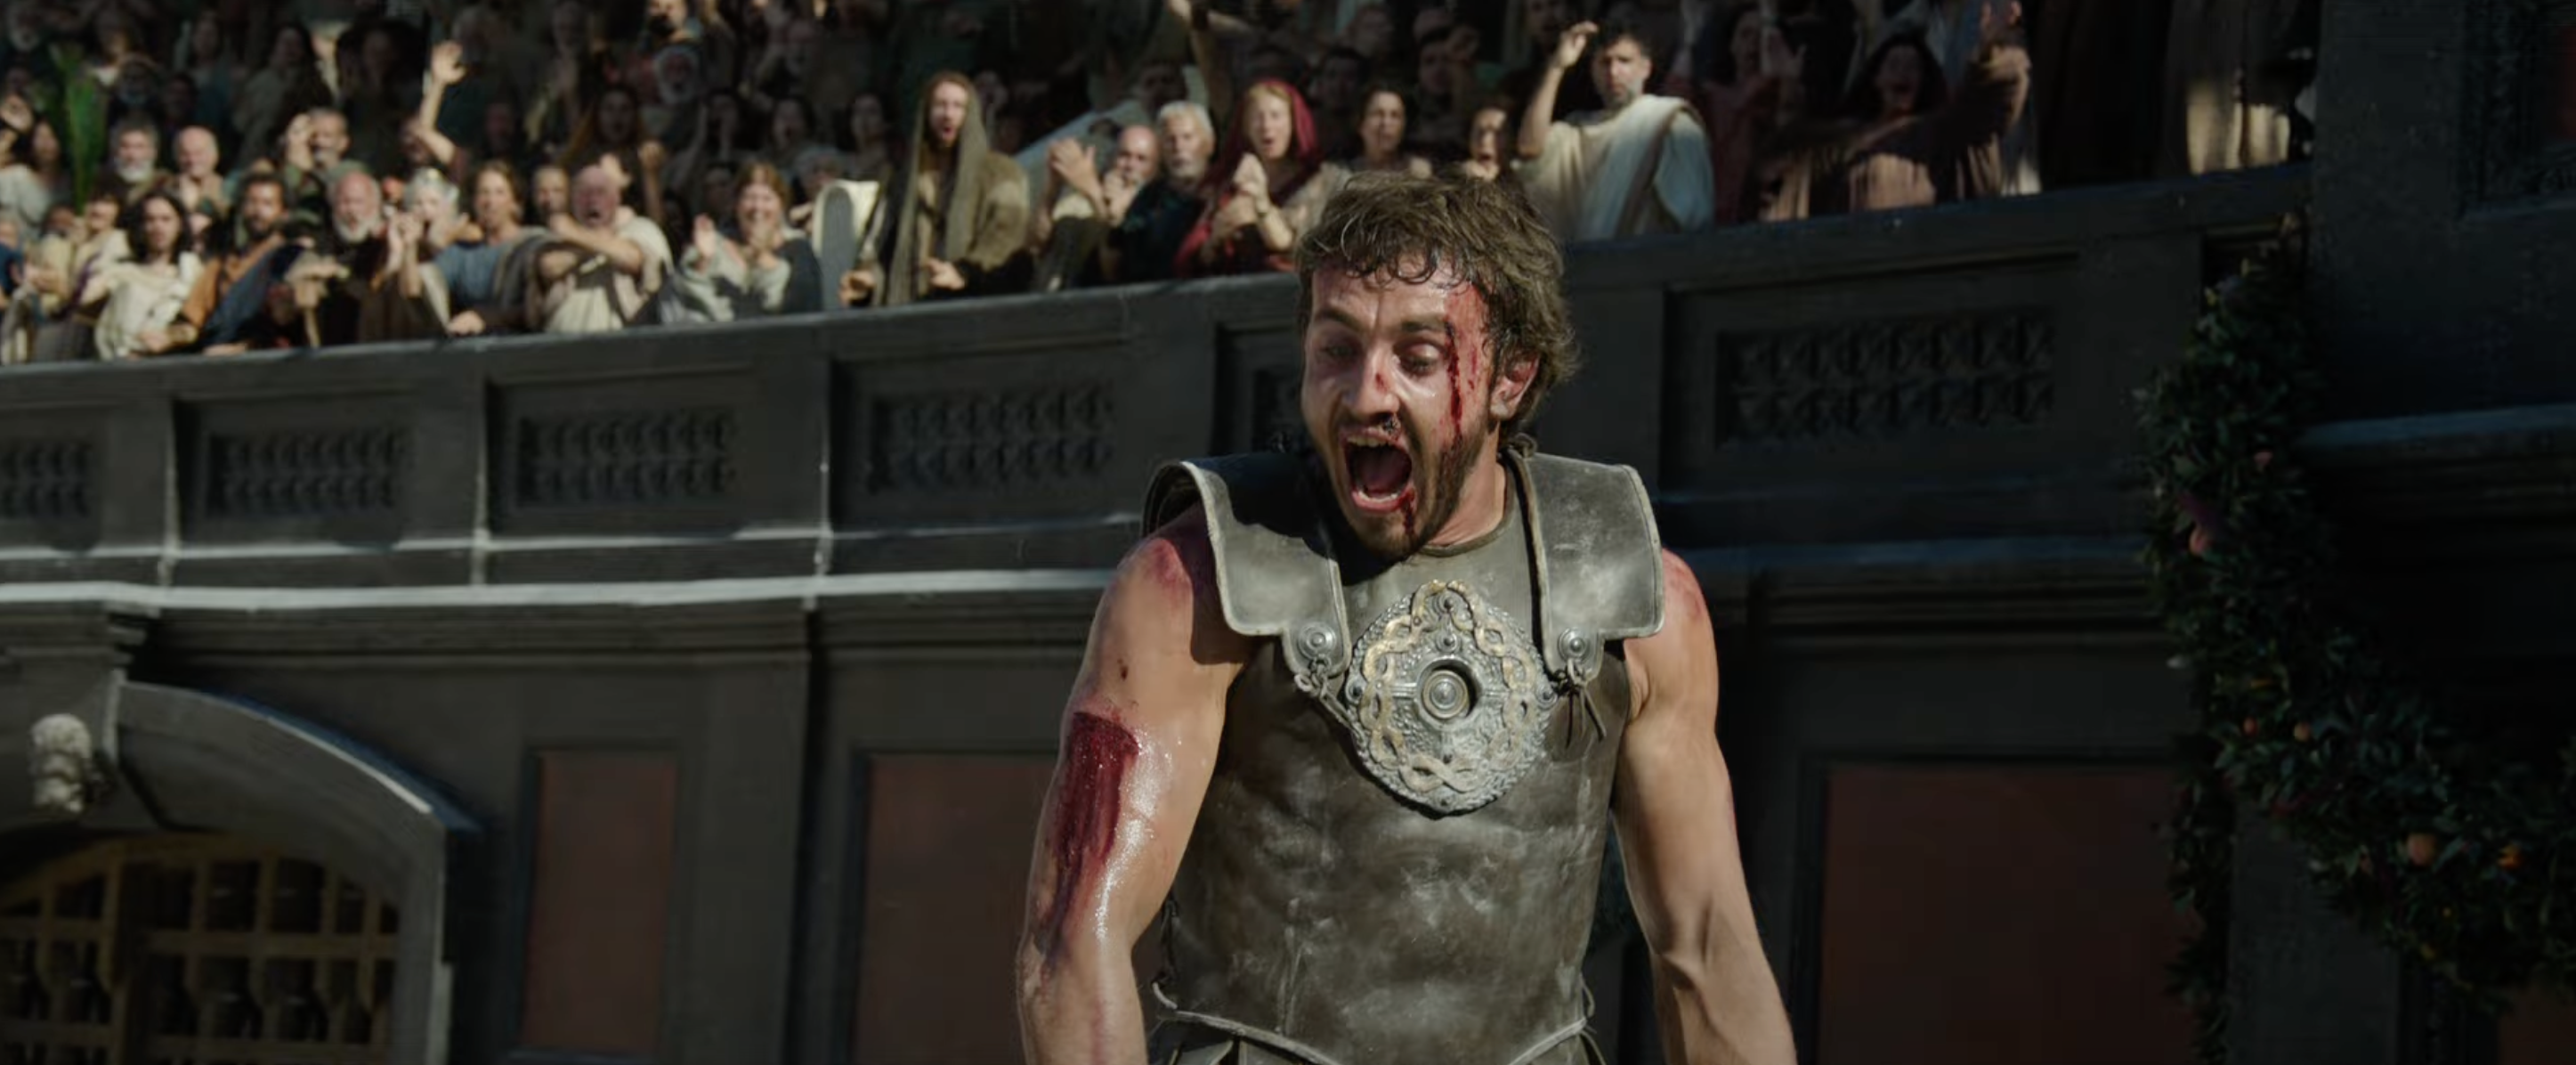 Paul Mescal, in gladiator armor with a bloody face, looks exhausted while standing in an arena. An audience in the background appears to be cheering